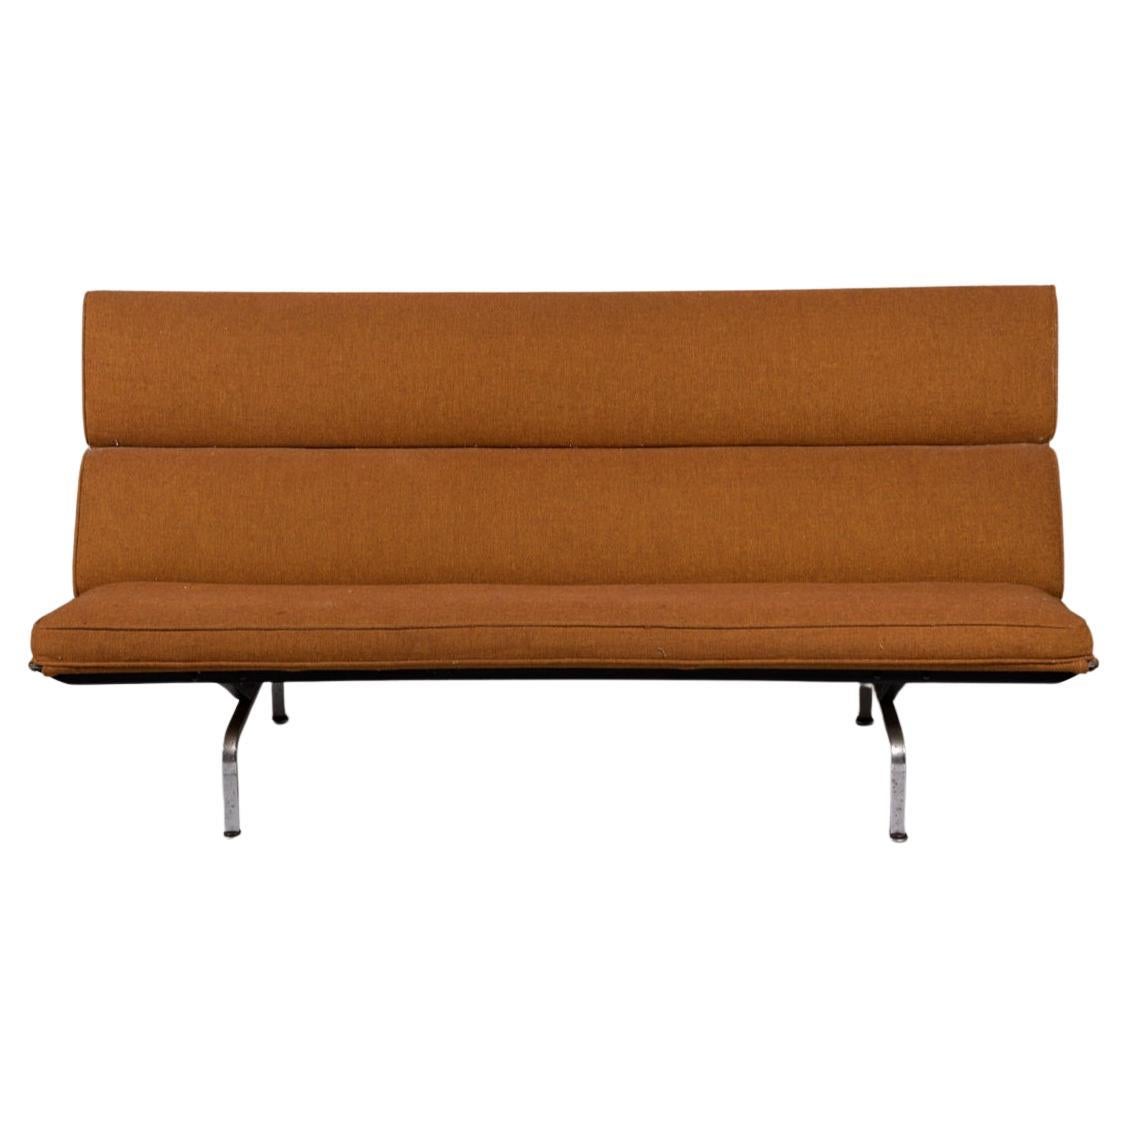 Original Mid century Compact Sofa by Ray and Charles Eames for Herman Miller